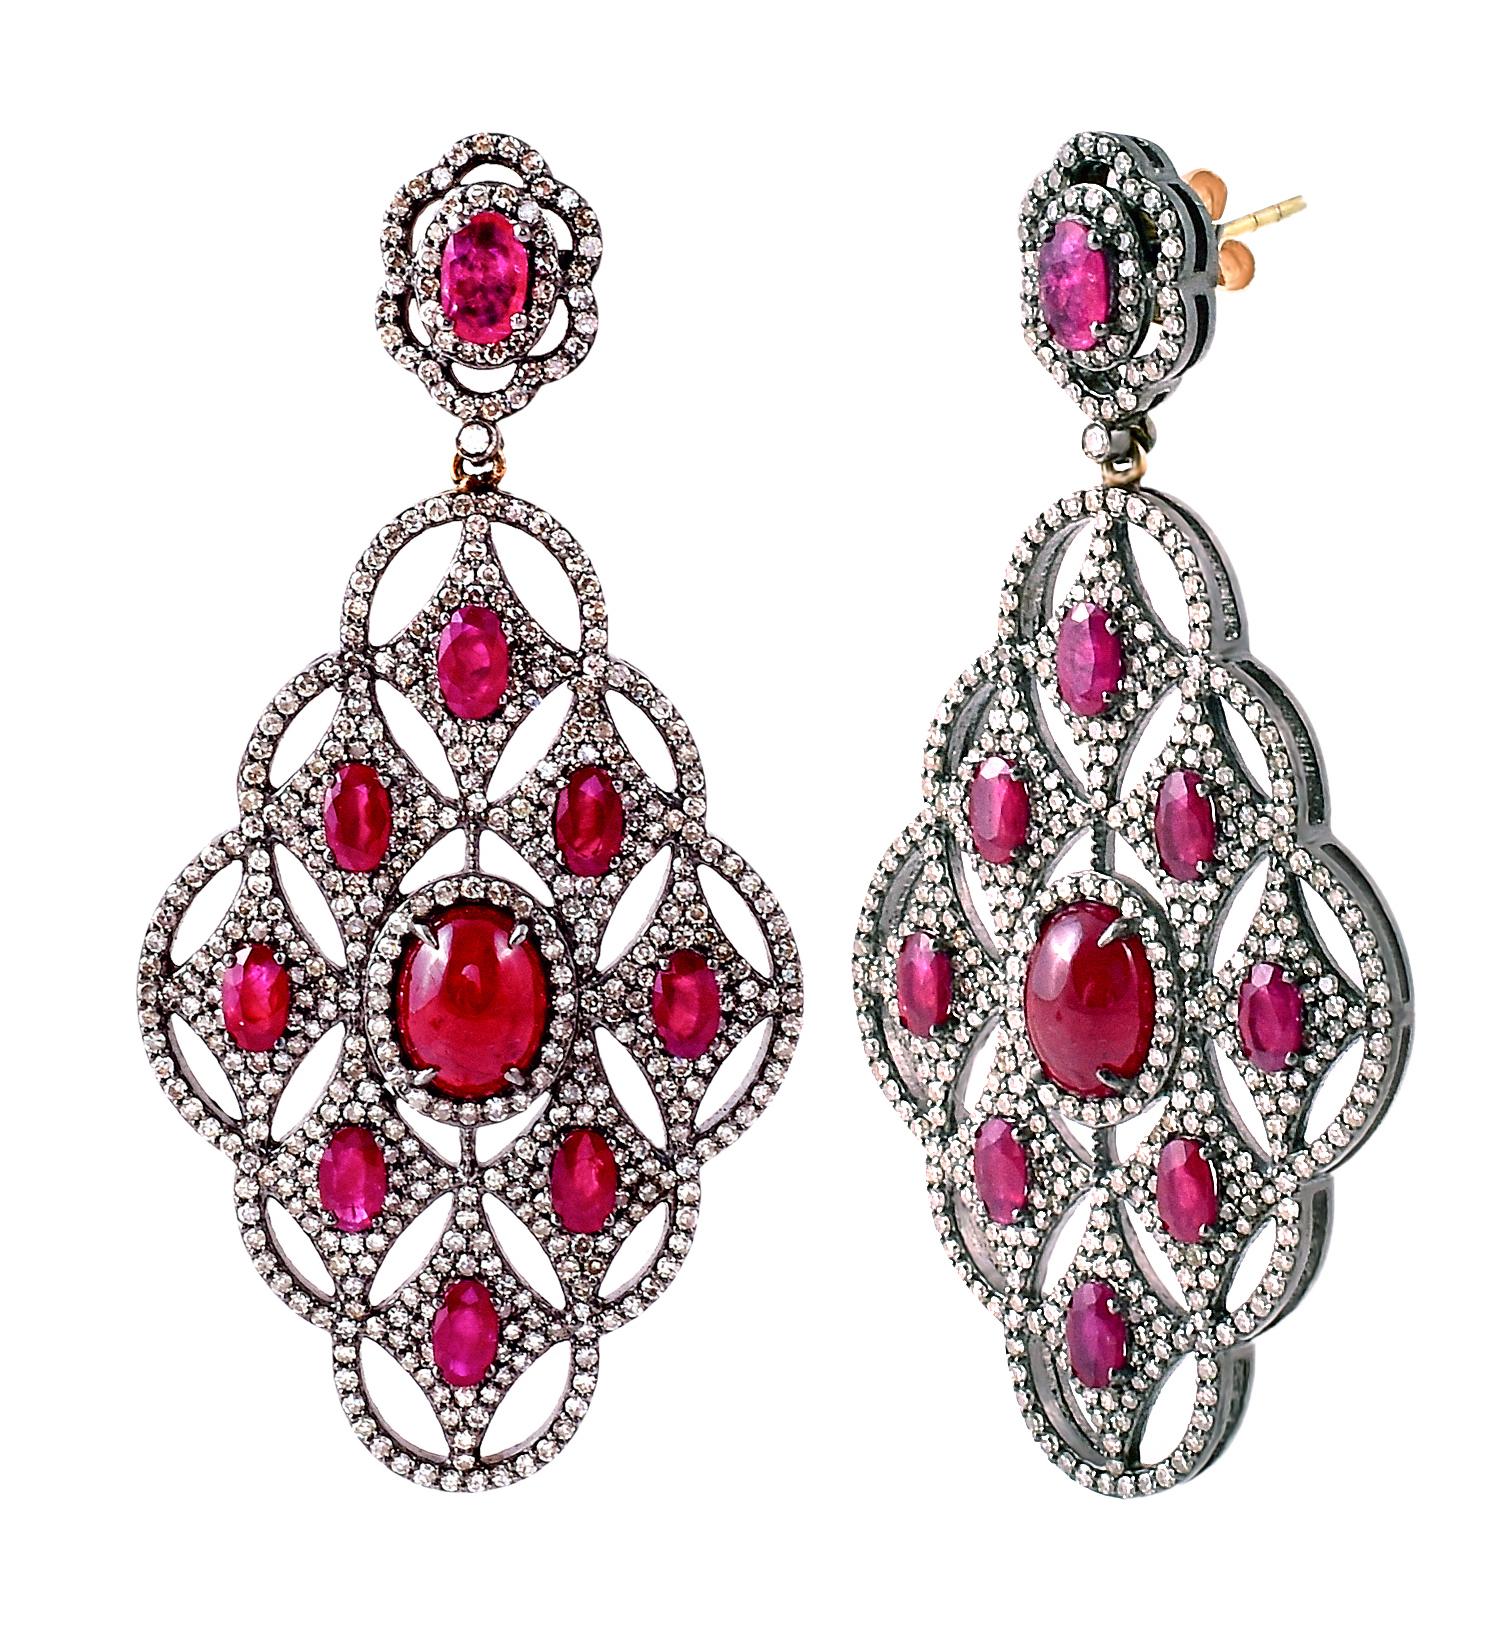 15.10 Carat Ruby and Diamond Cocktail Dangle Earrings in Art-Deco Style

This Victorian style impressive scarlet red ruby and diamond hanging earring is exceptional. The bottom overall kite shape formed with the beautiful designer element of 9